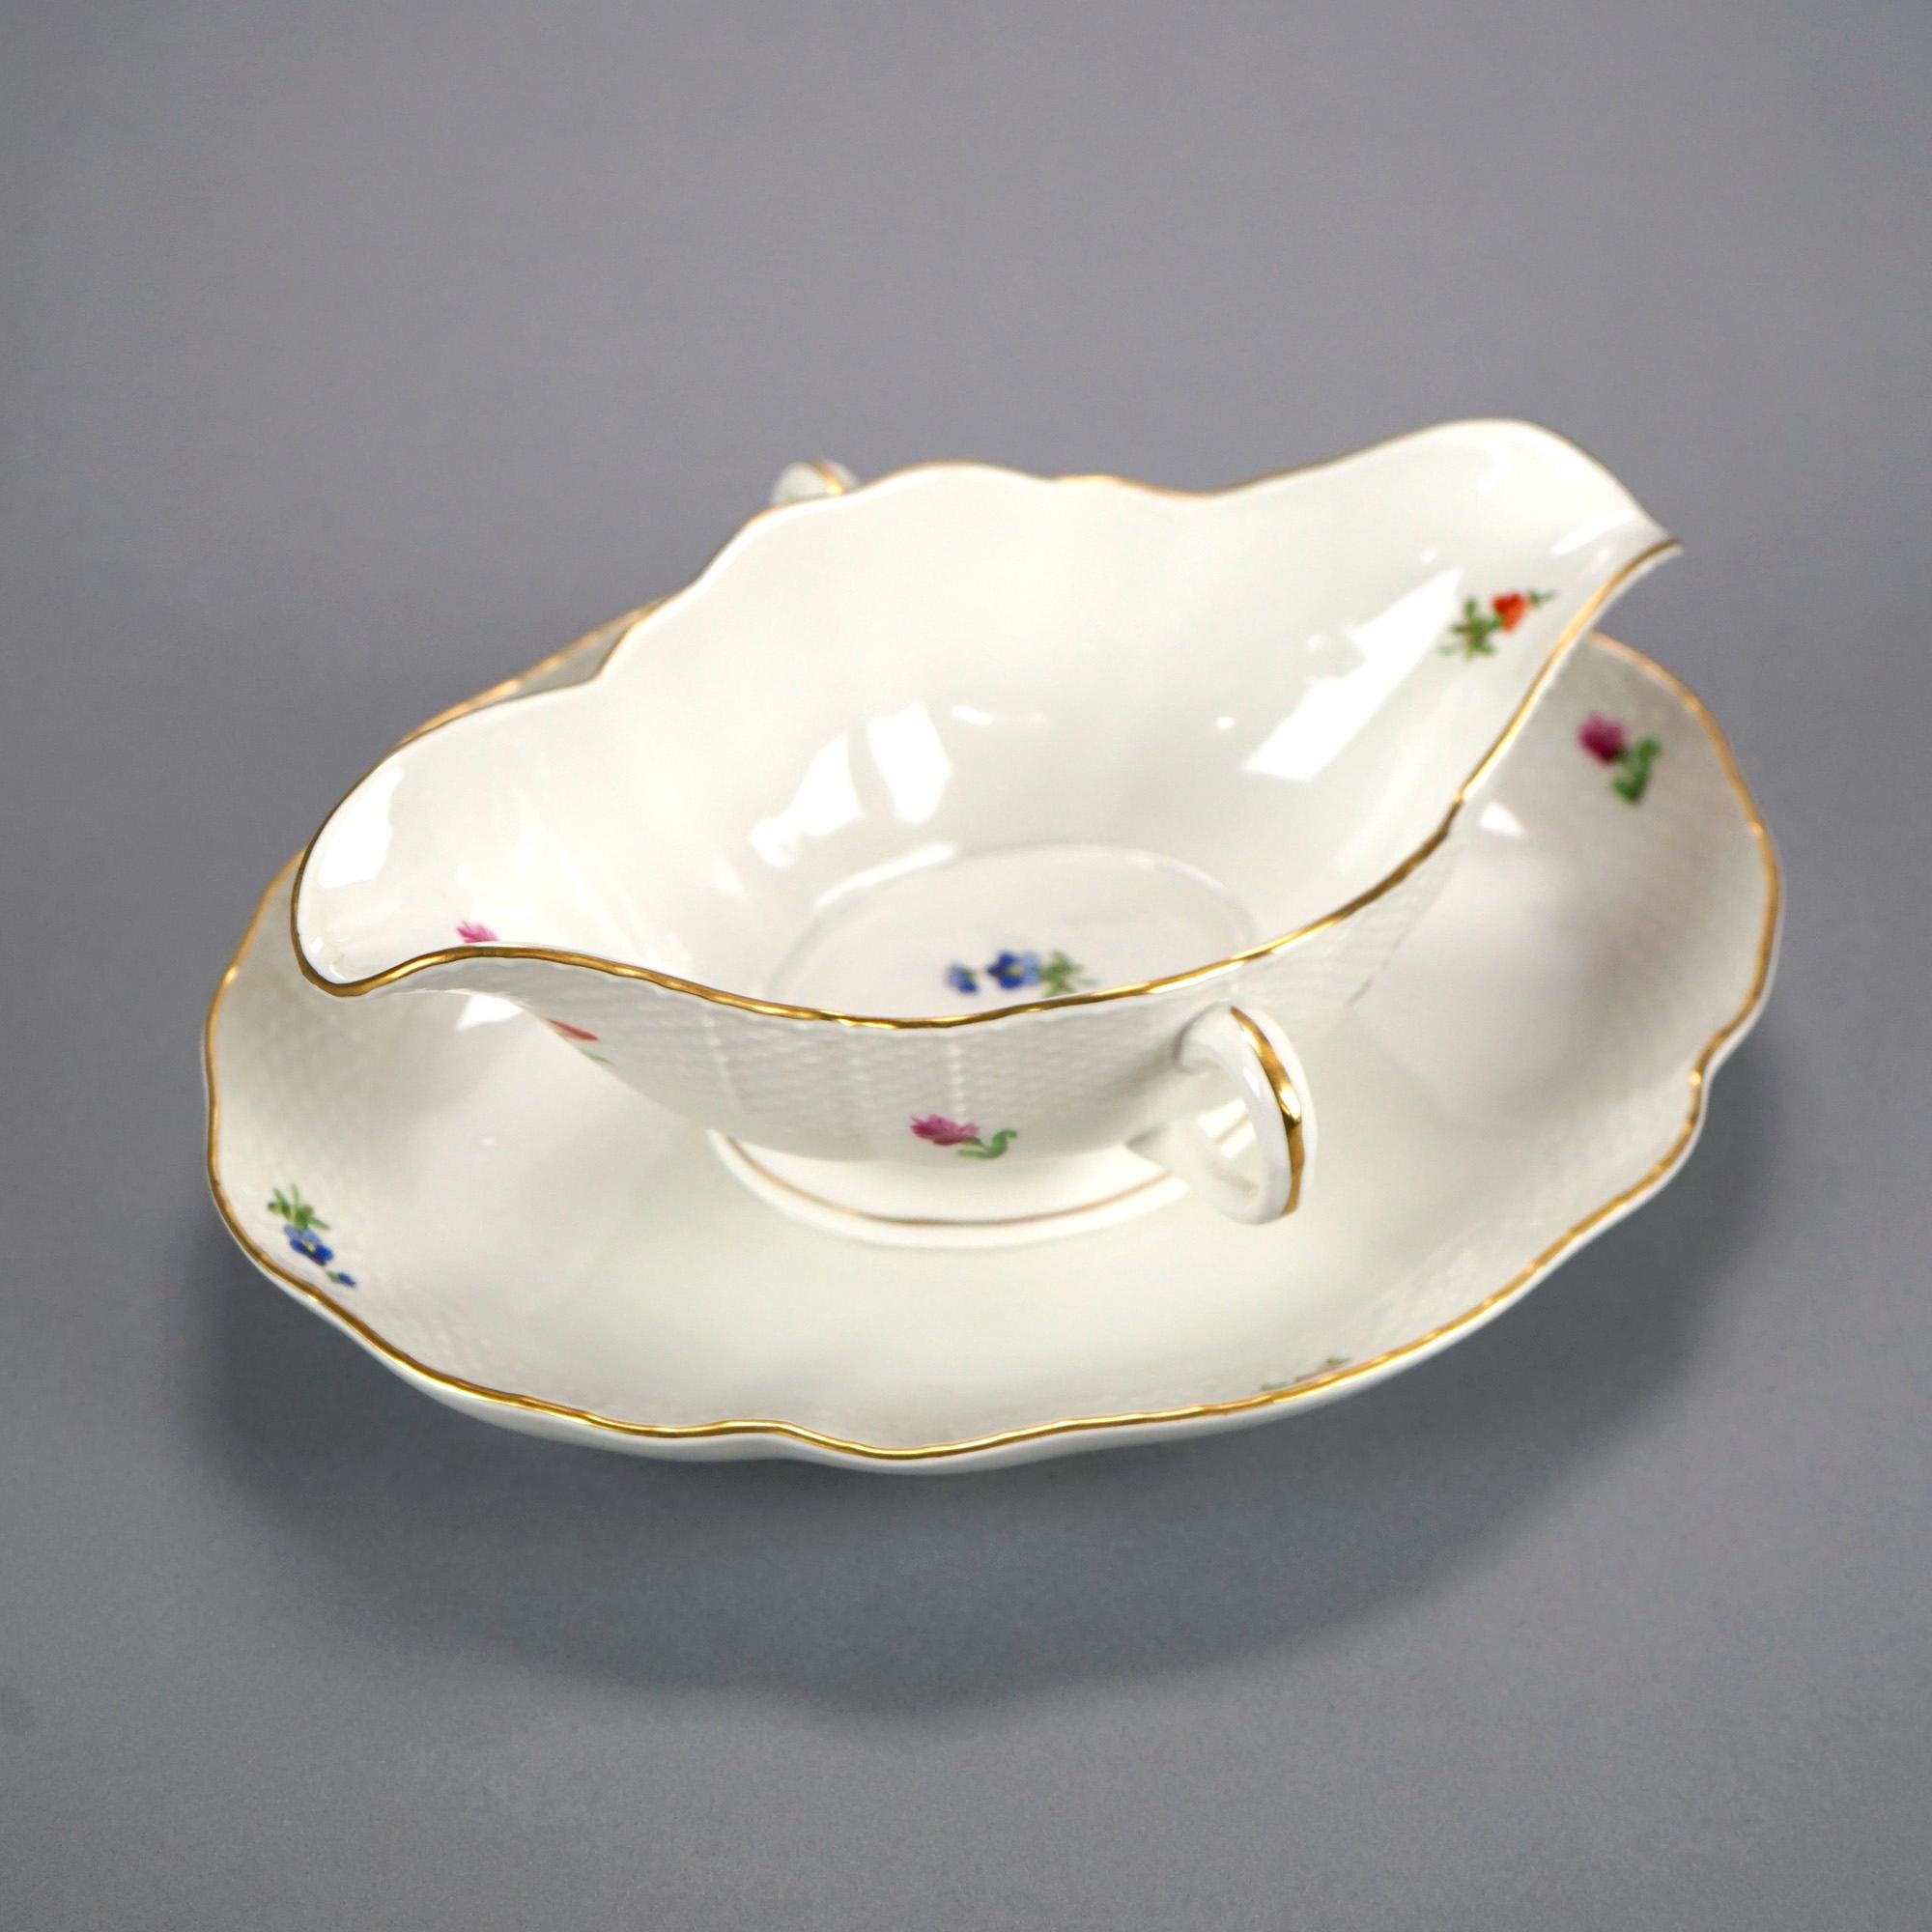 Herend Porcelain Double Handled Gravy Sauce Boat with Painted Flowers, 20th C In Good Condition For Sale In Big Flats, NY